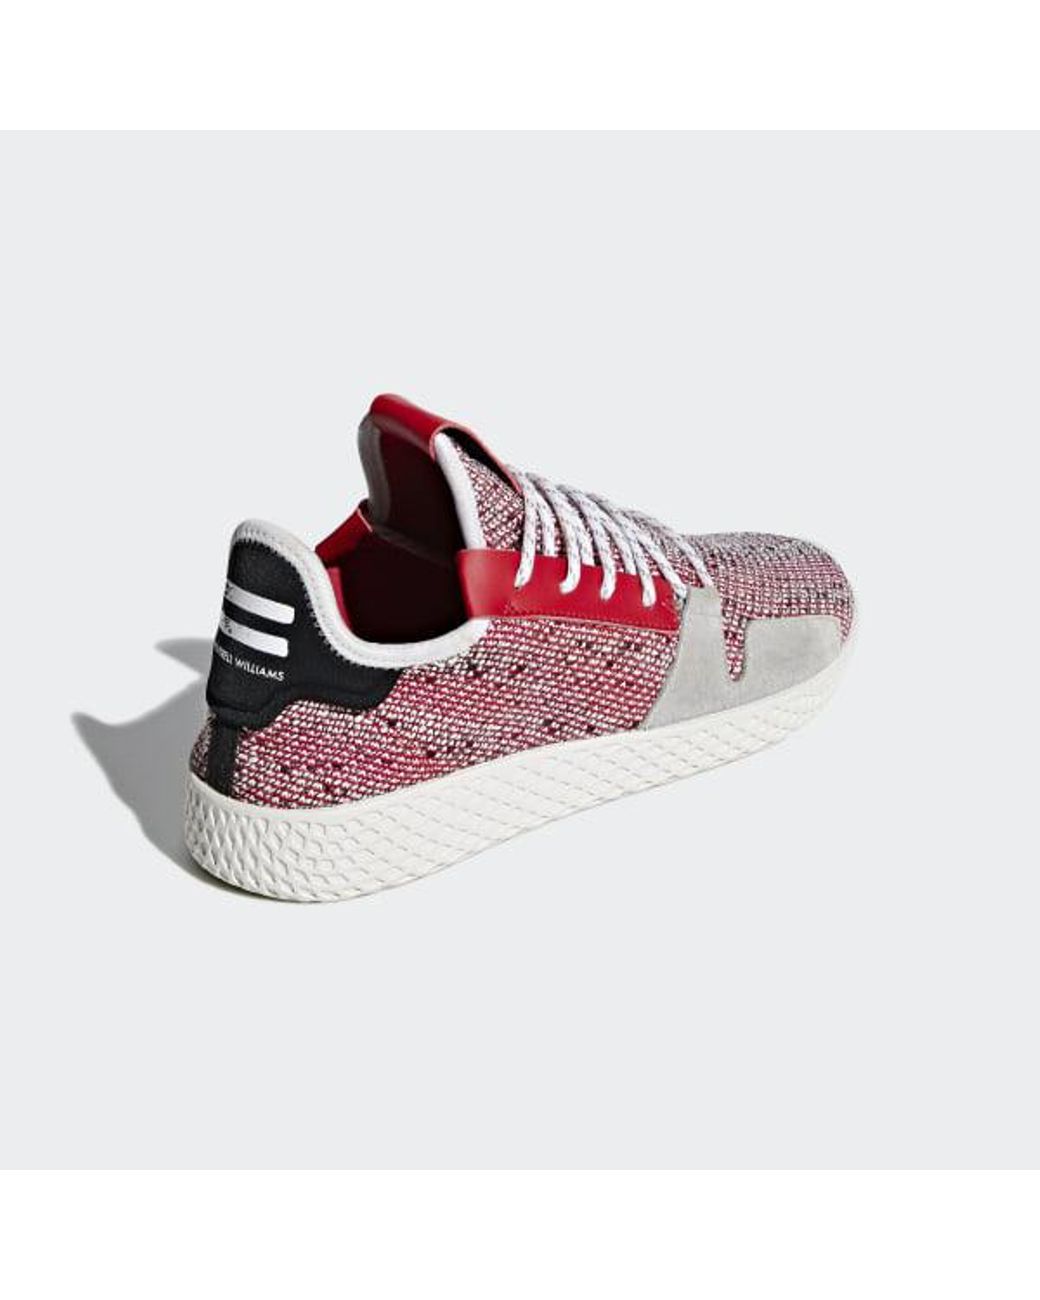 adidas Lace Pharrell Williams Solarhu Tennis V2 Shoes in Red - Lyst